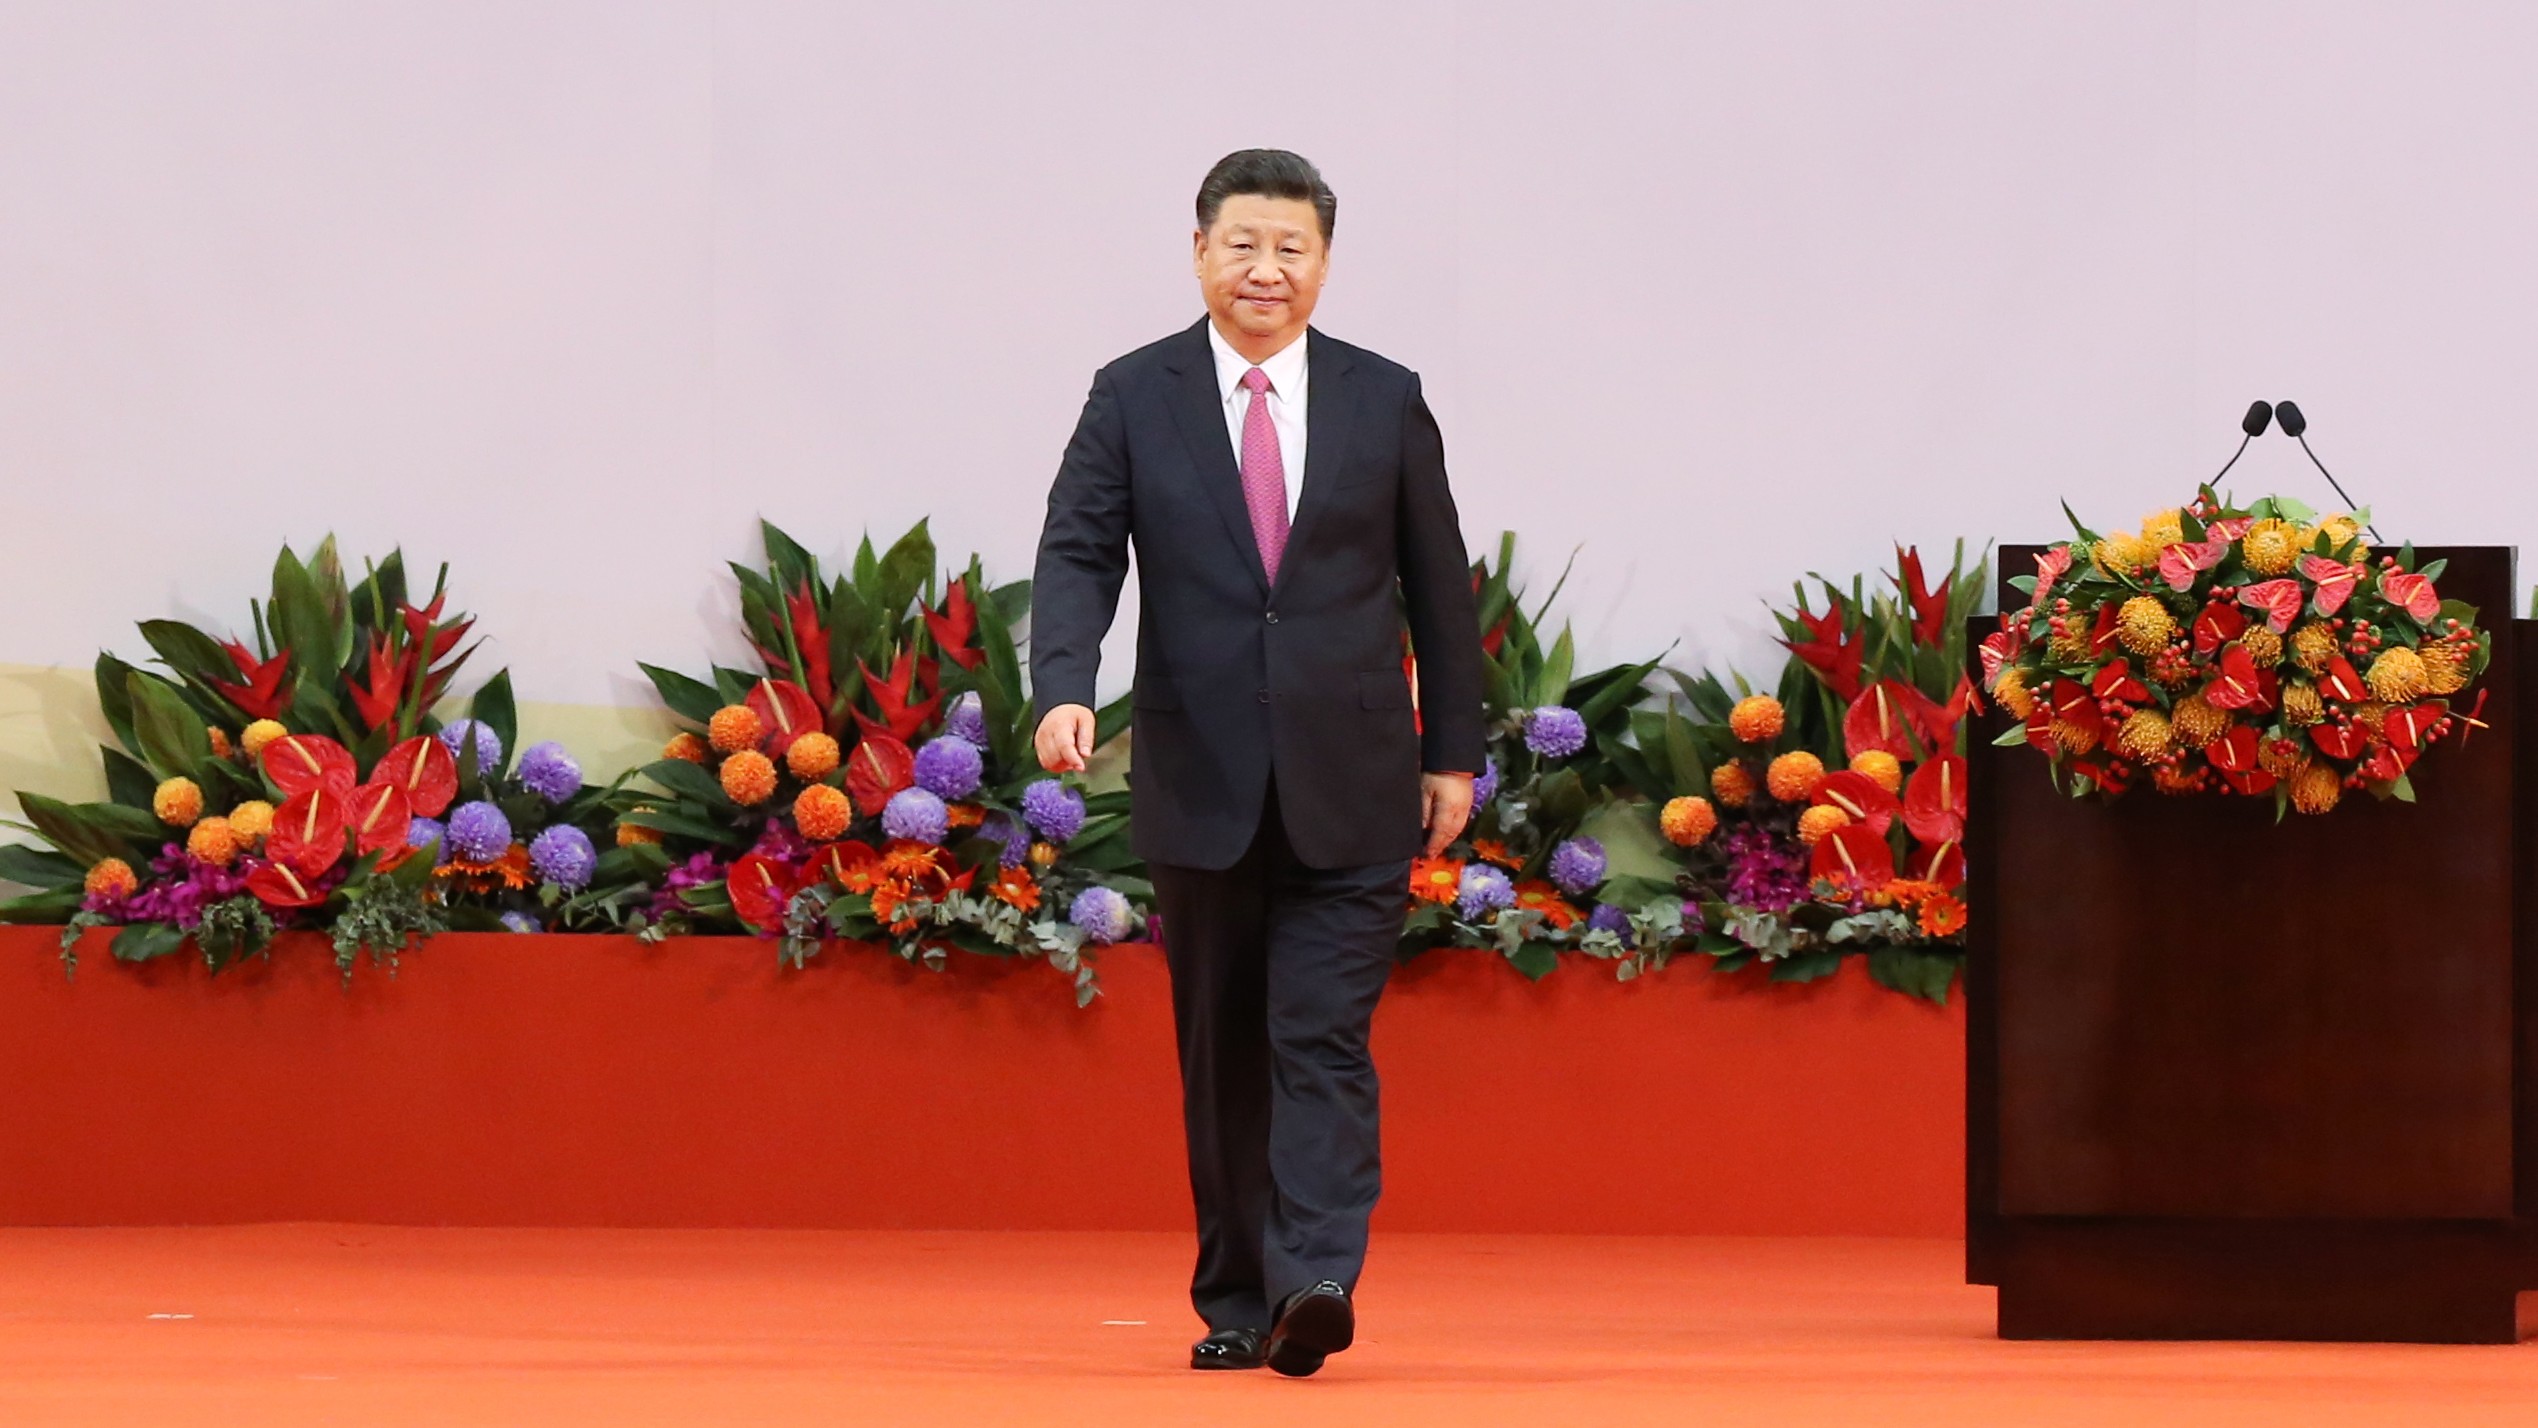 Chinese President Xi Jinping at the swearing-in ceremony for Hong Kong’s new administration. Photo: Sam Tsang